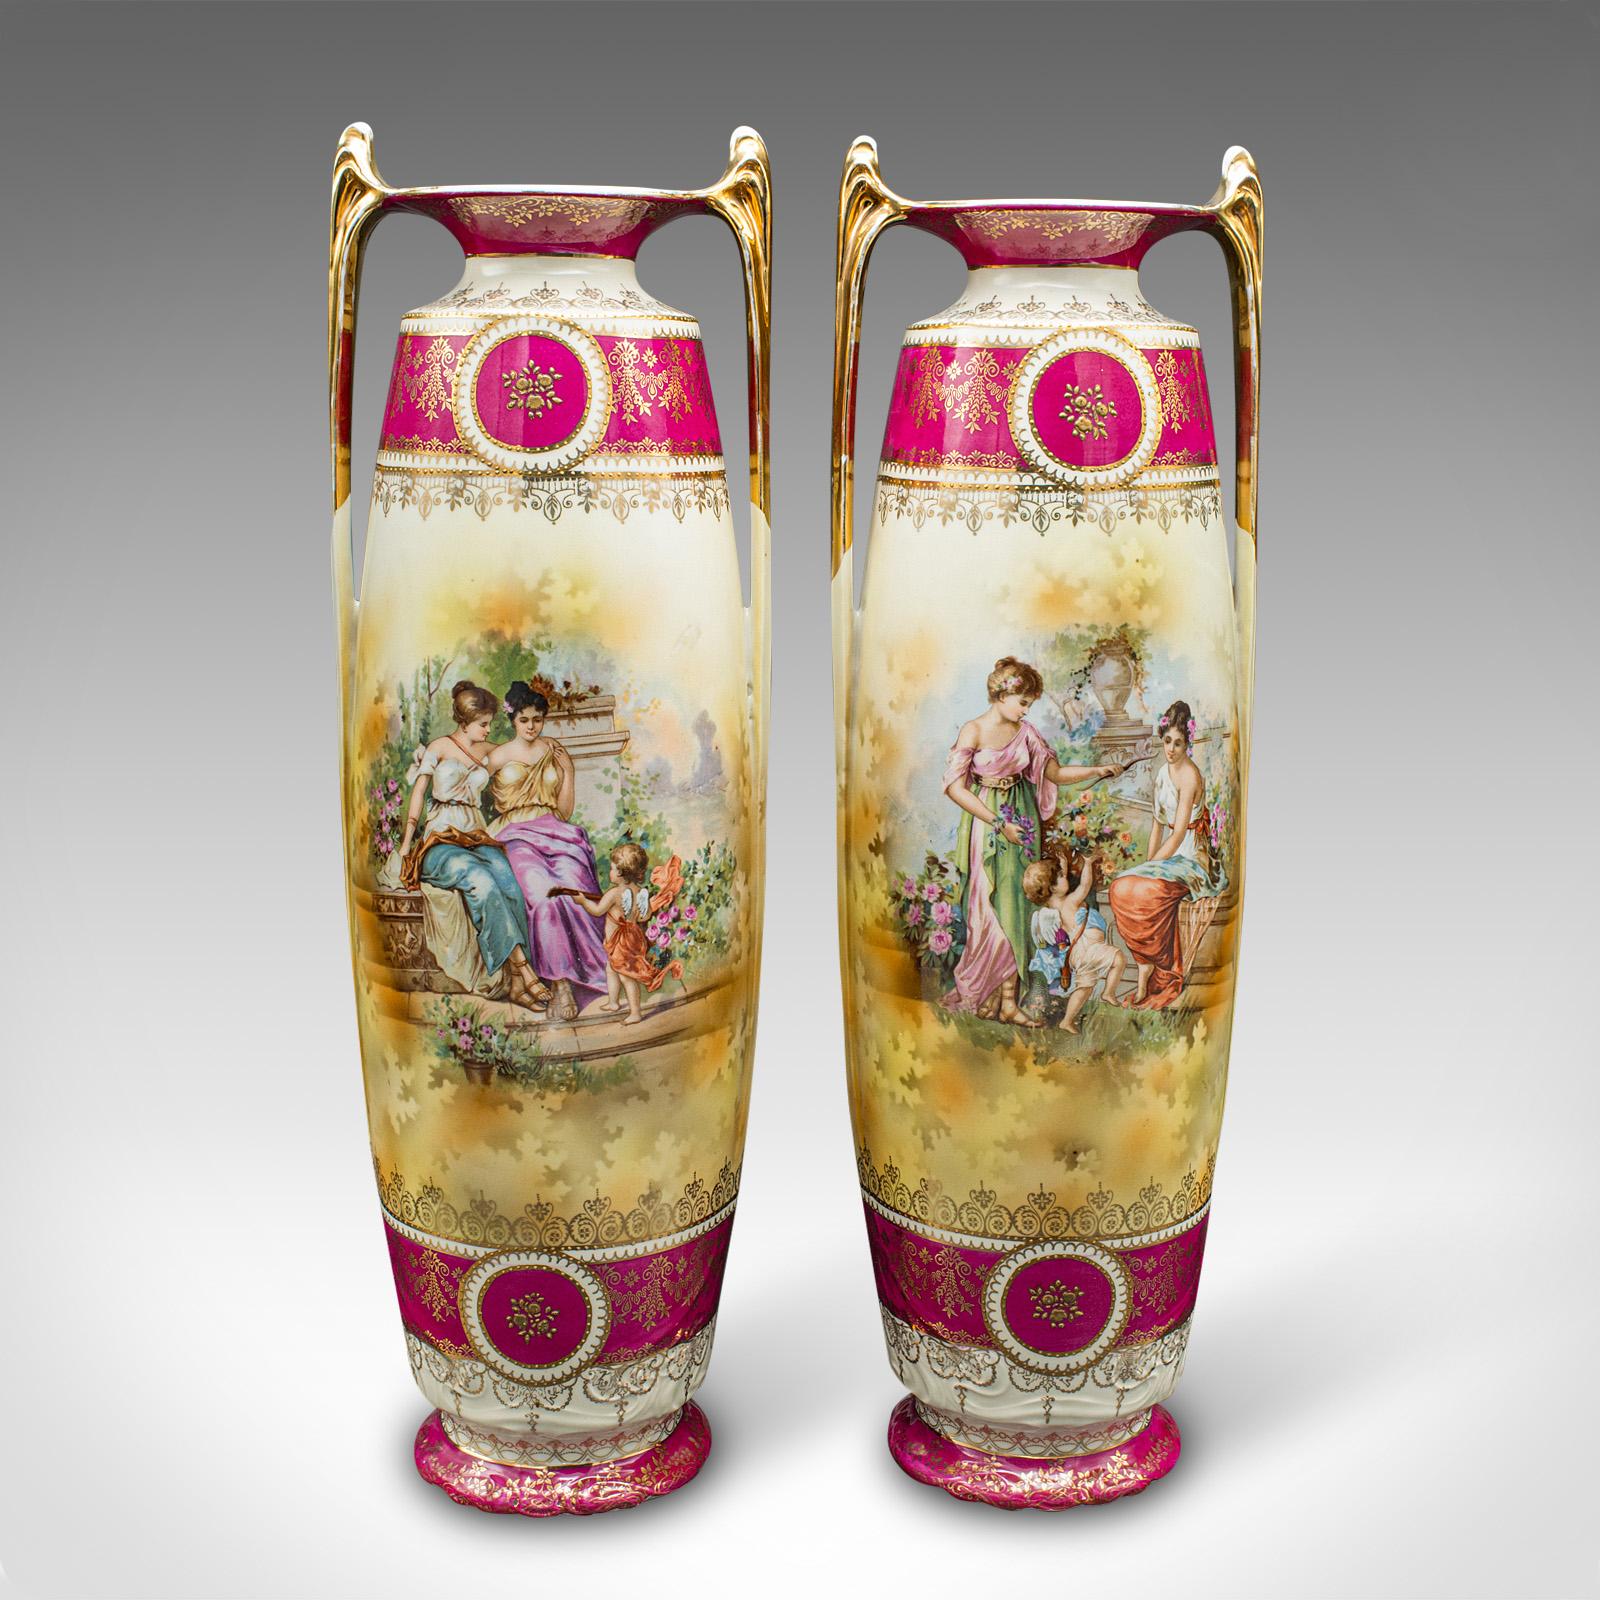 This is a pair of tall antique stem vases. An Austrian, ceramic flower sleeve, dating to the early Victorian period, circa 1850.

Beautifully decorated vases, with superb colour and figural scenes
Displaying a desirable aged patina and in good